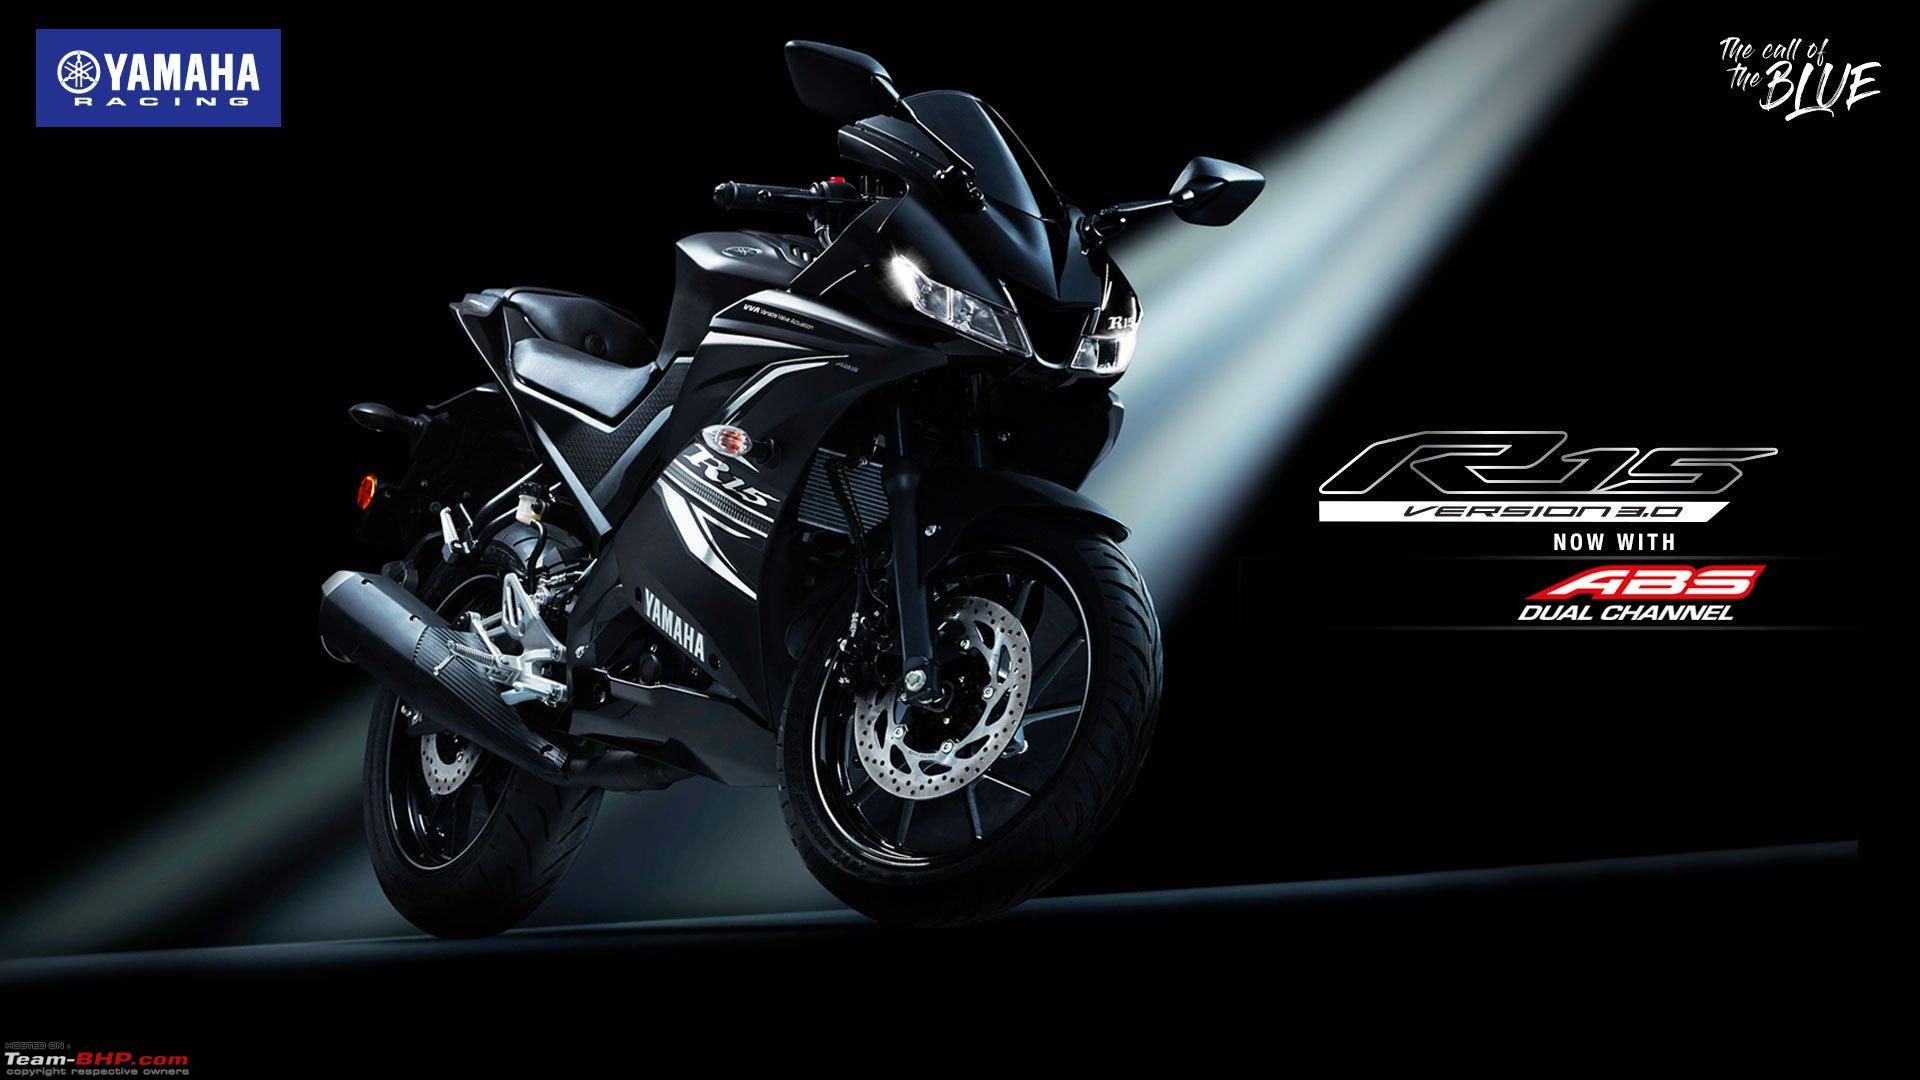 Yamaha YZF R15 V3.0 With Dual Channel ABS Launched At Rs. 1.39